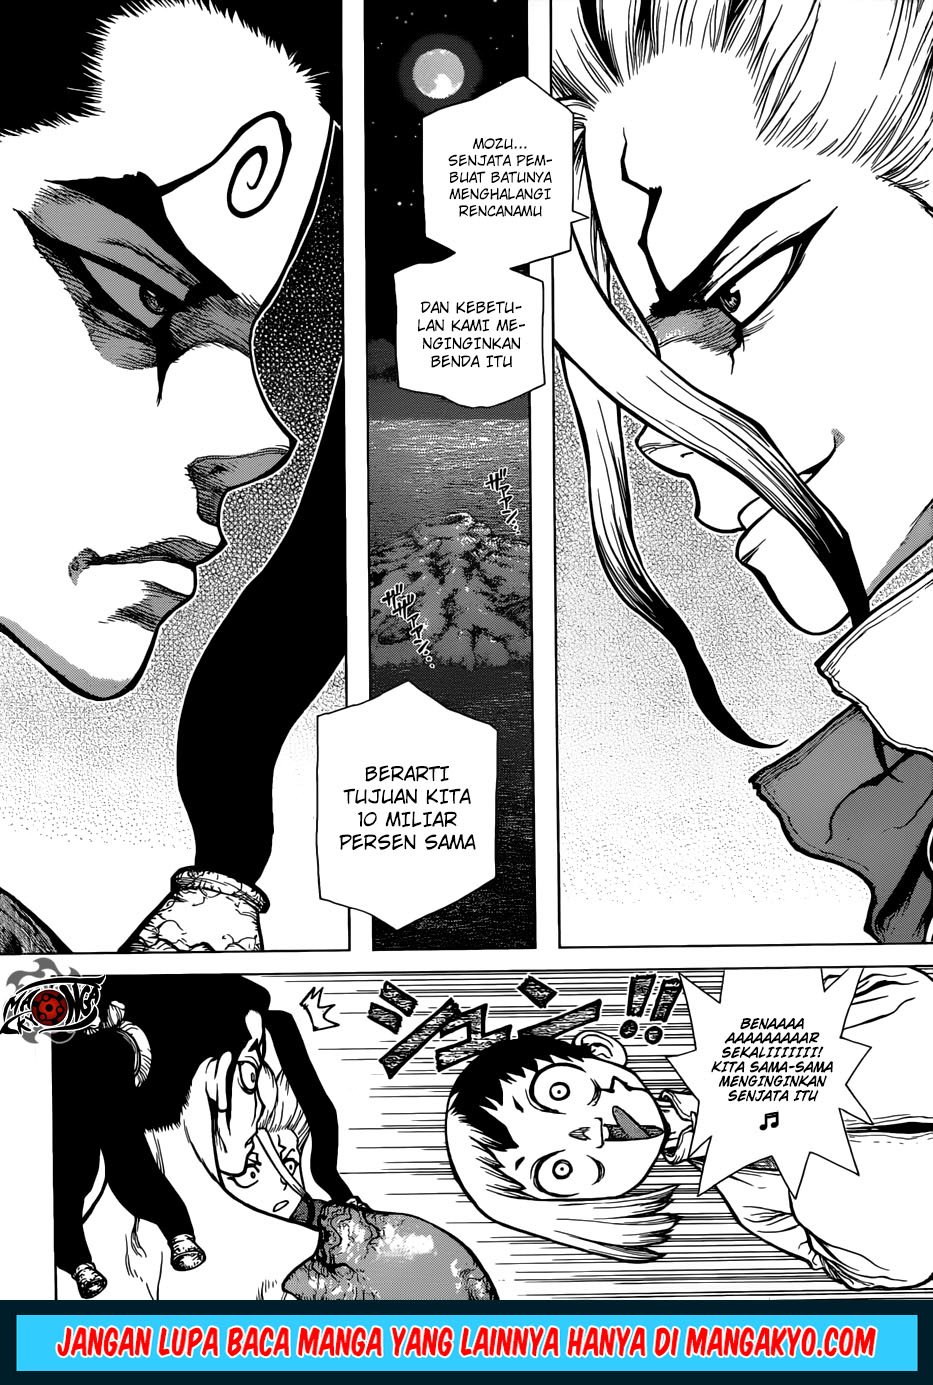 Dr Stone Chapter 123